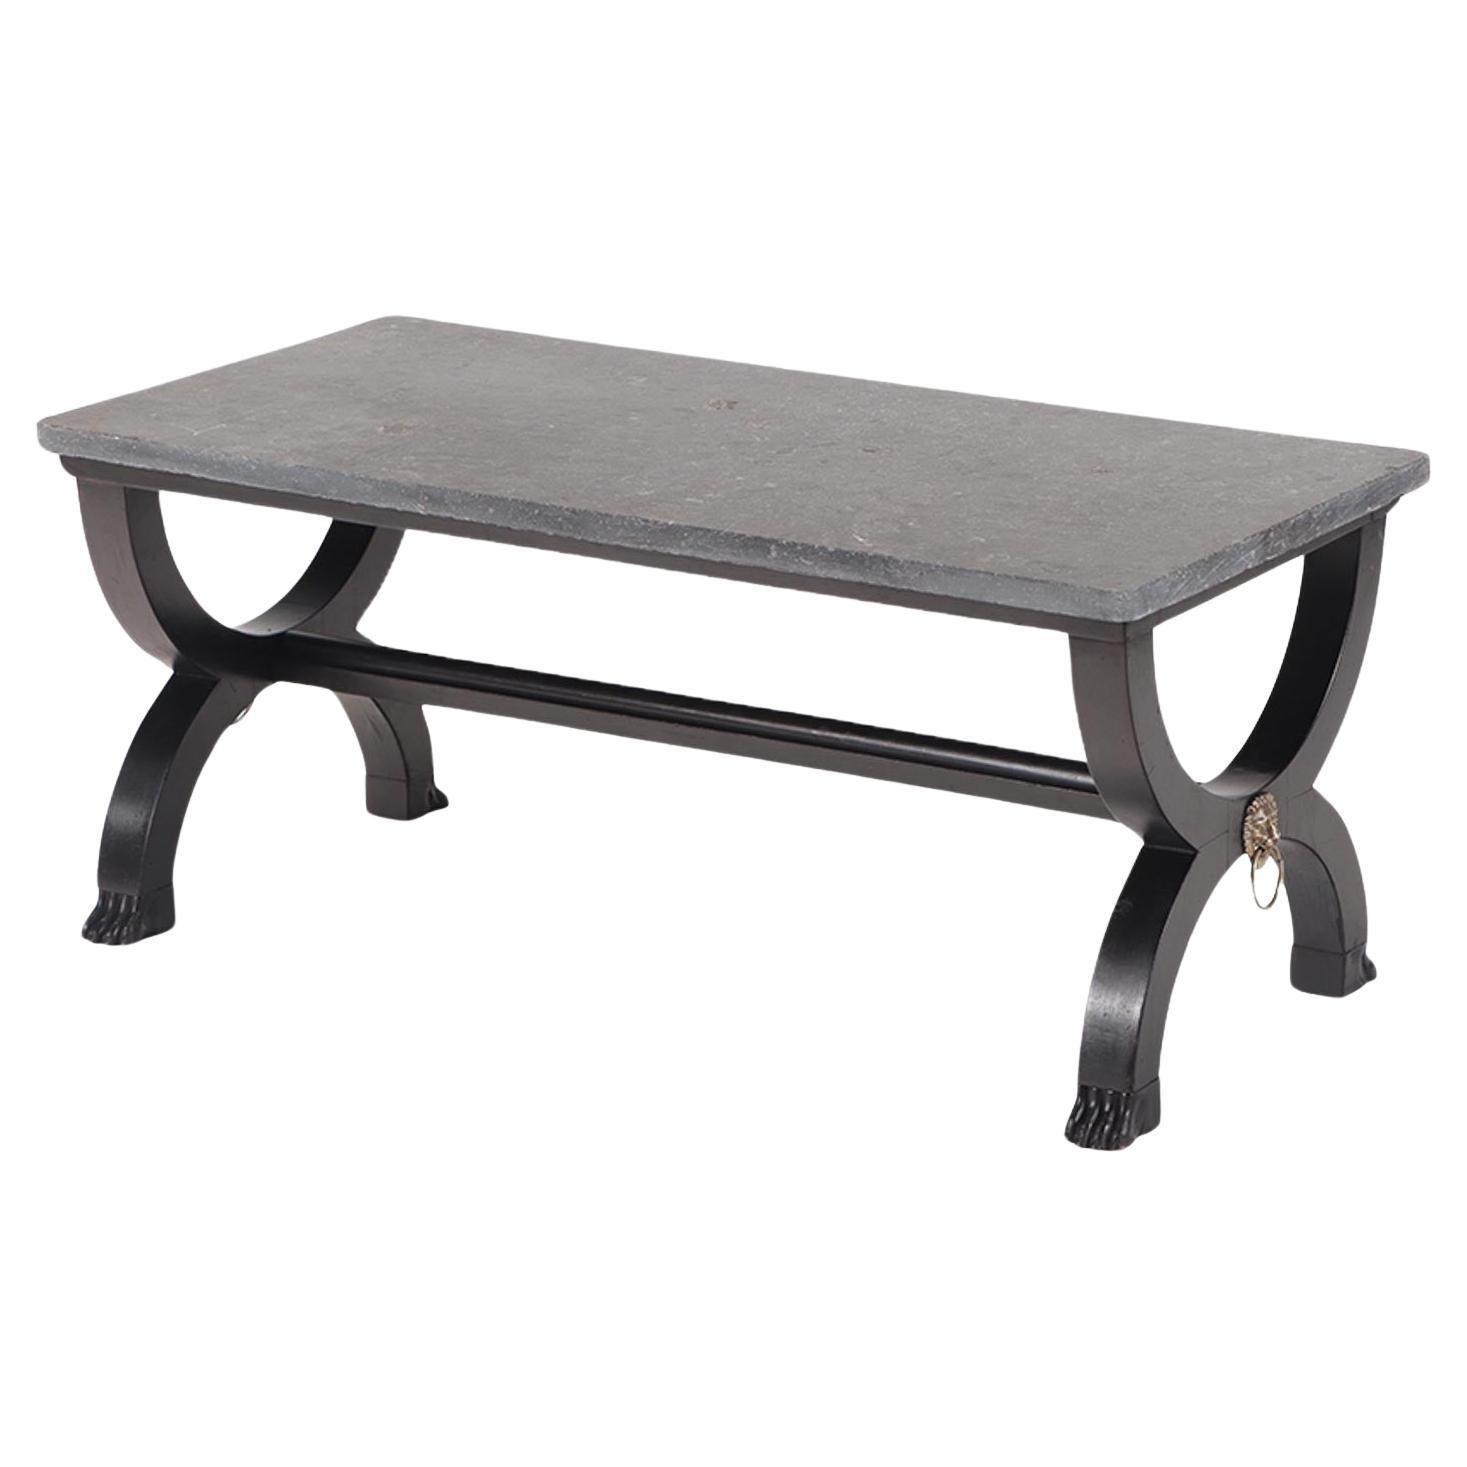 A French ebonized Empire style marble top coffee table with bronze mounts. 